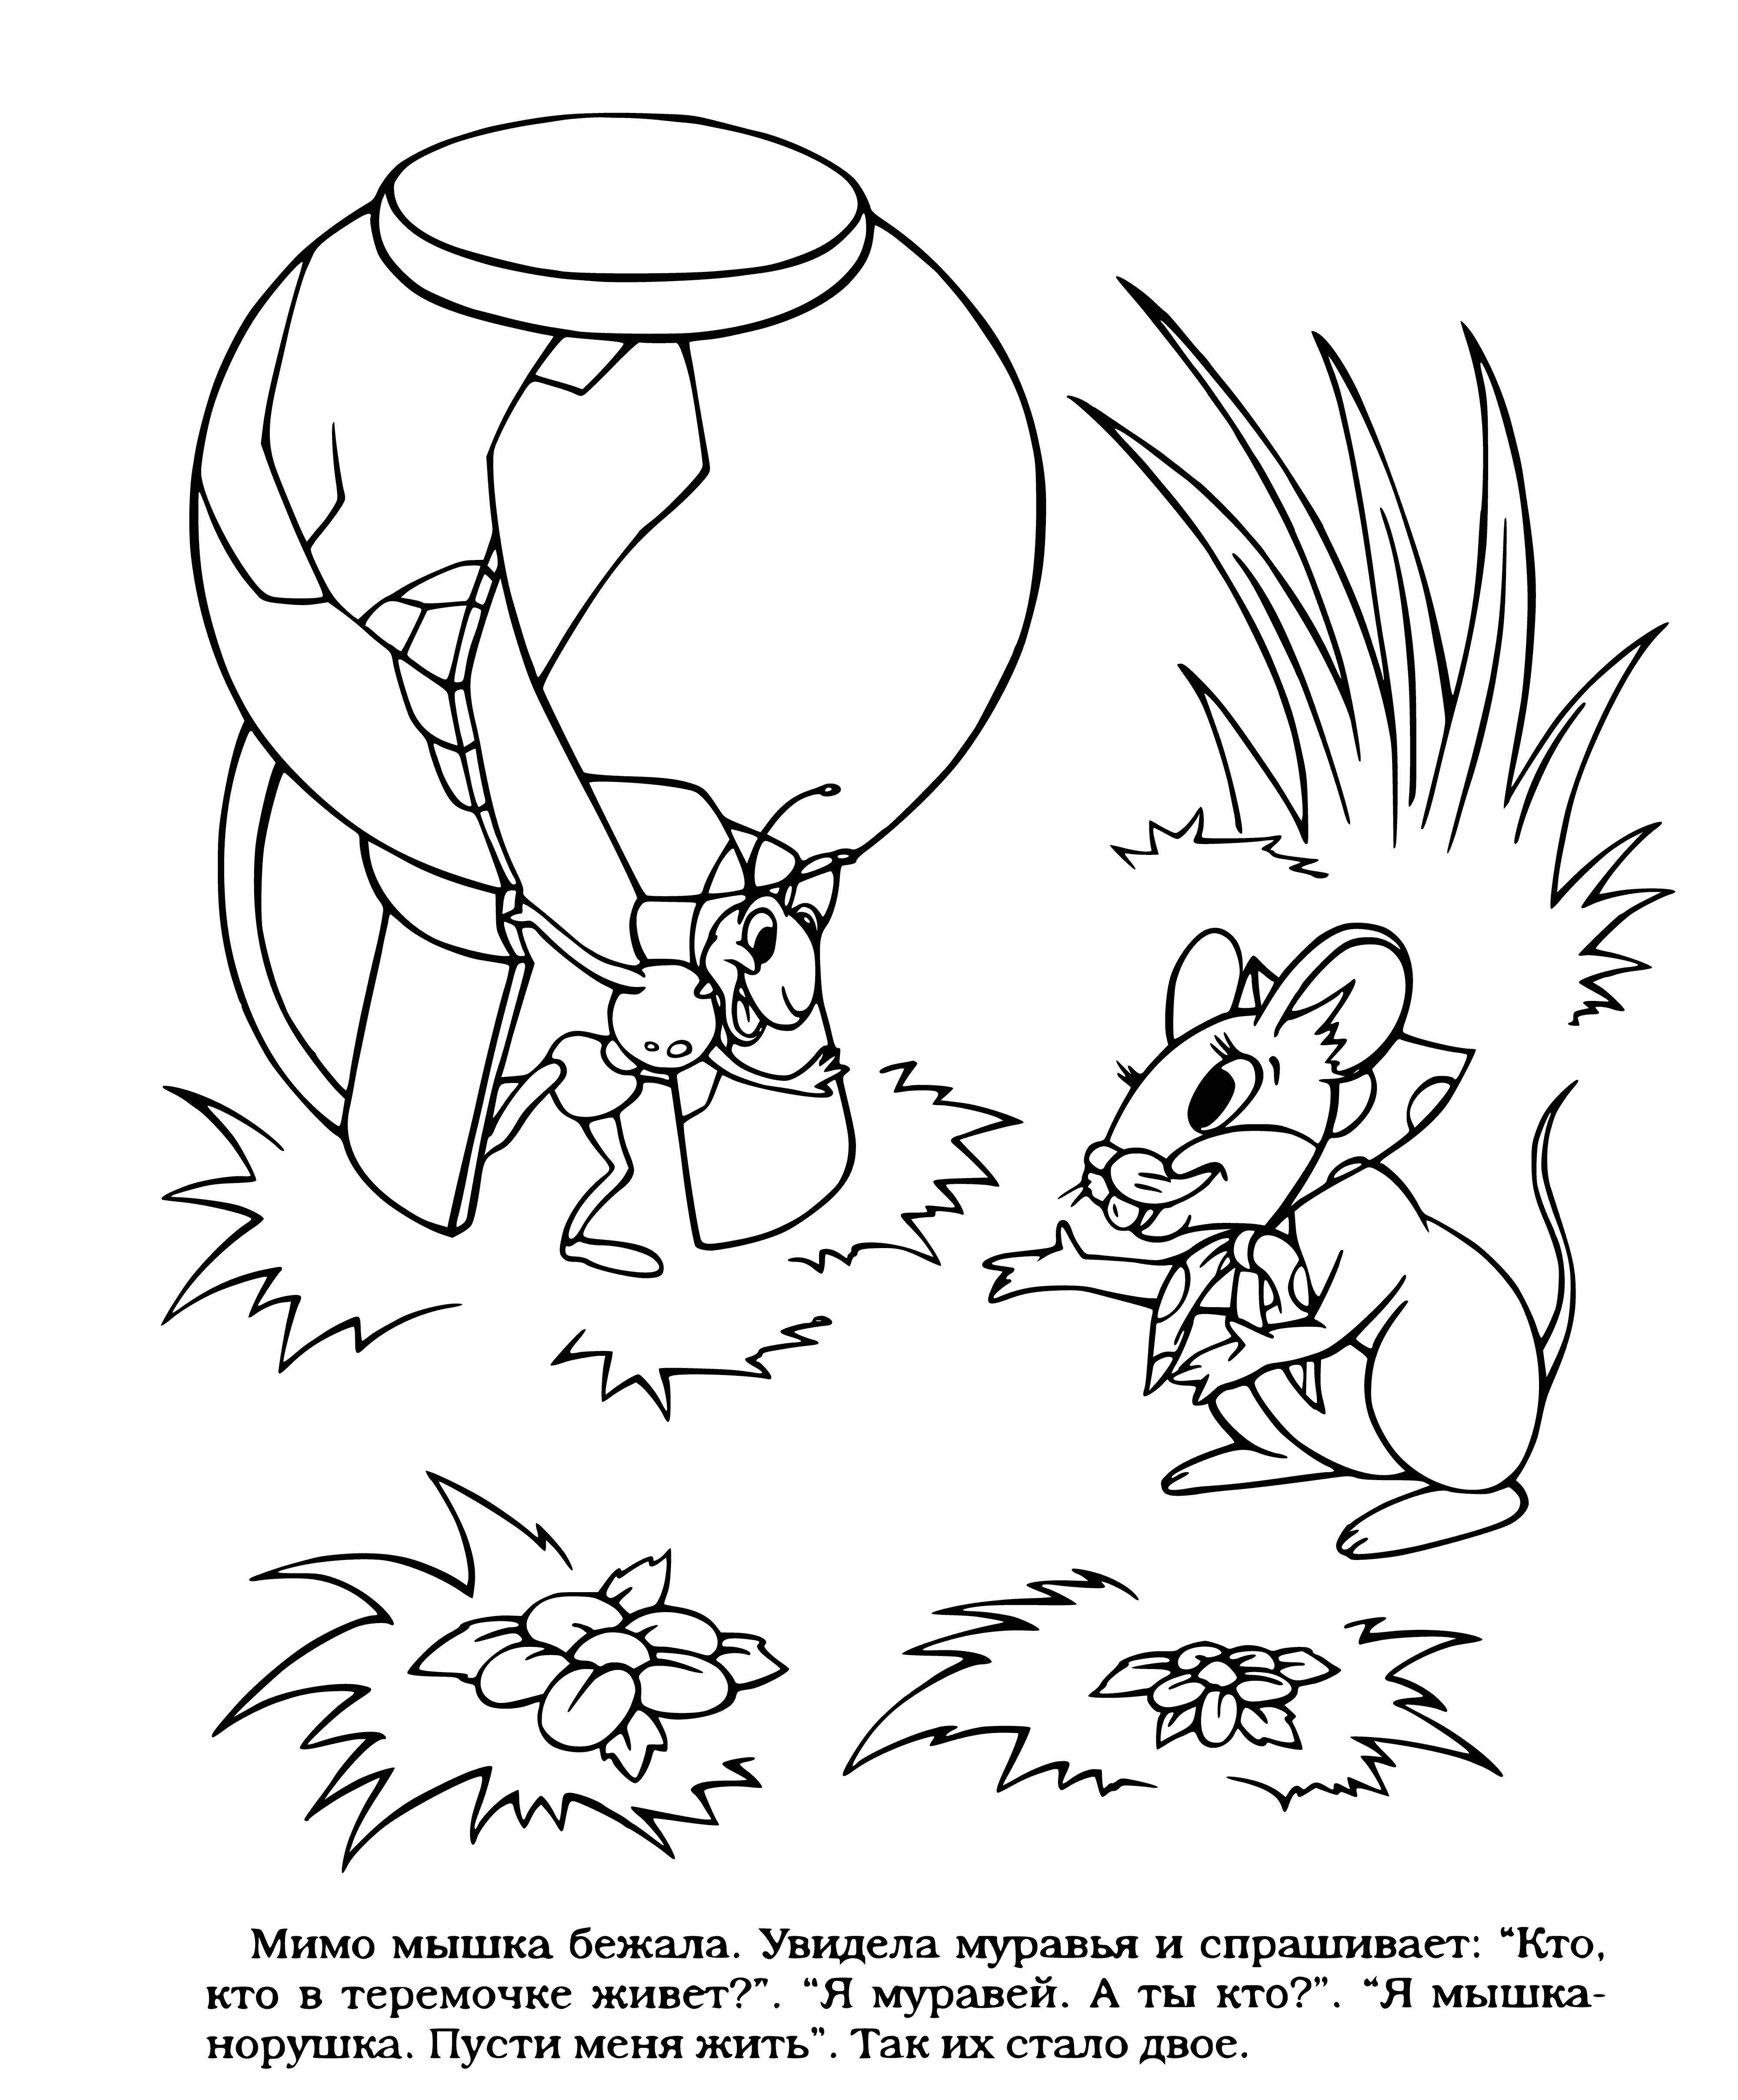 coloring page: Girl has a mouse, reads a book & smiles: a Russian folktale of "Little mouse" in a coloring page. #russianfolktale